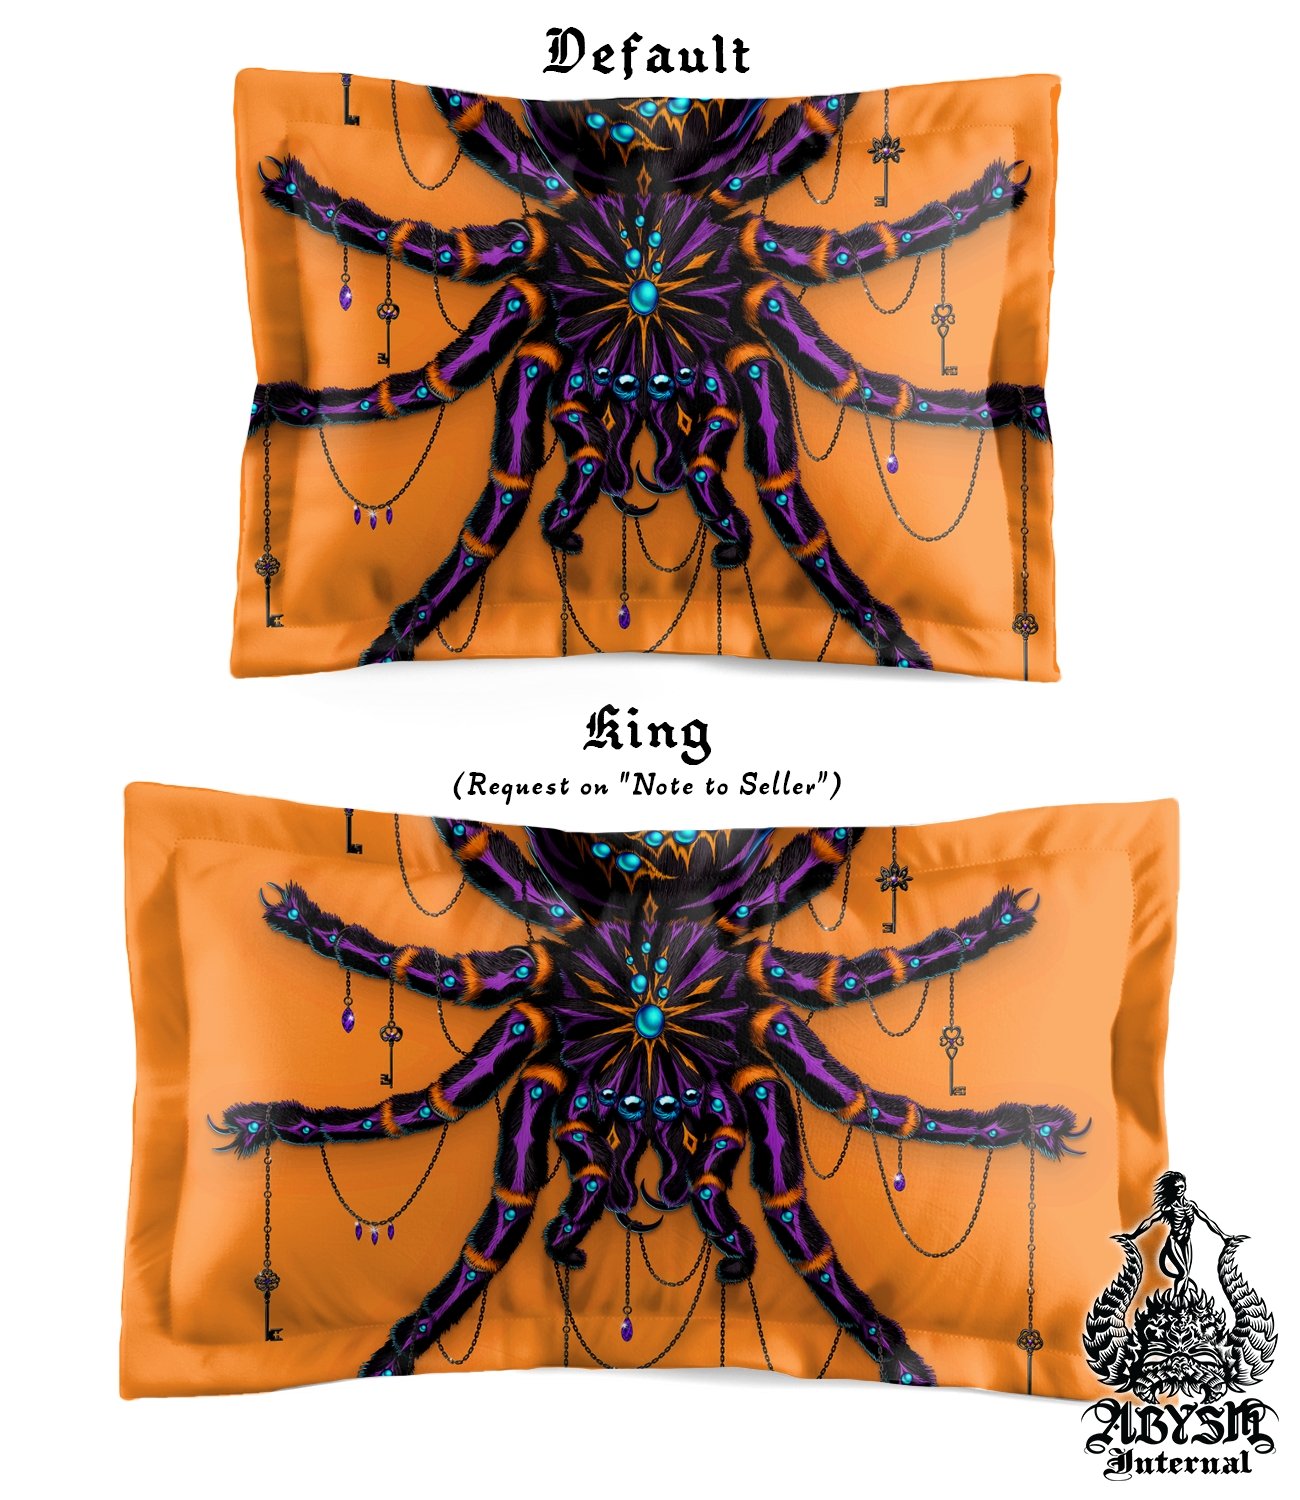 Spider Bedding Set, Comforter and Duvet, Bed Cover and Bedroom Decor, King, Queen and Twin Size - Tarantula Neon Goth - Abysm Internal